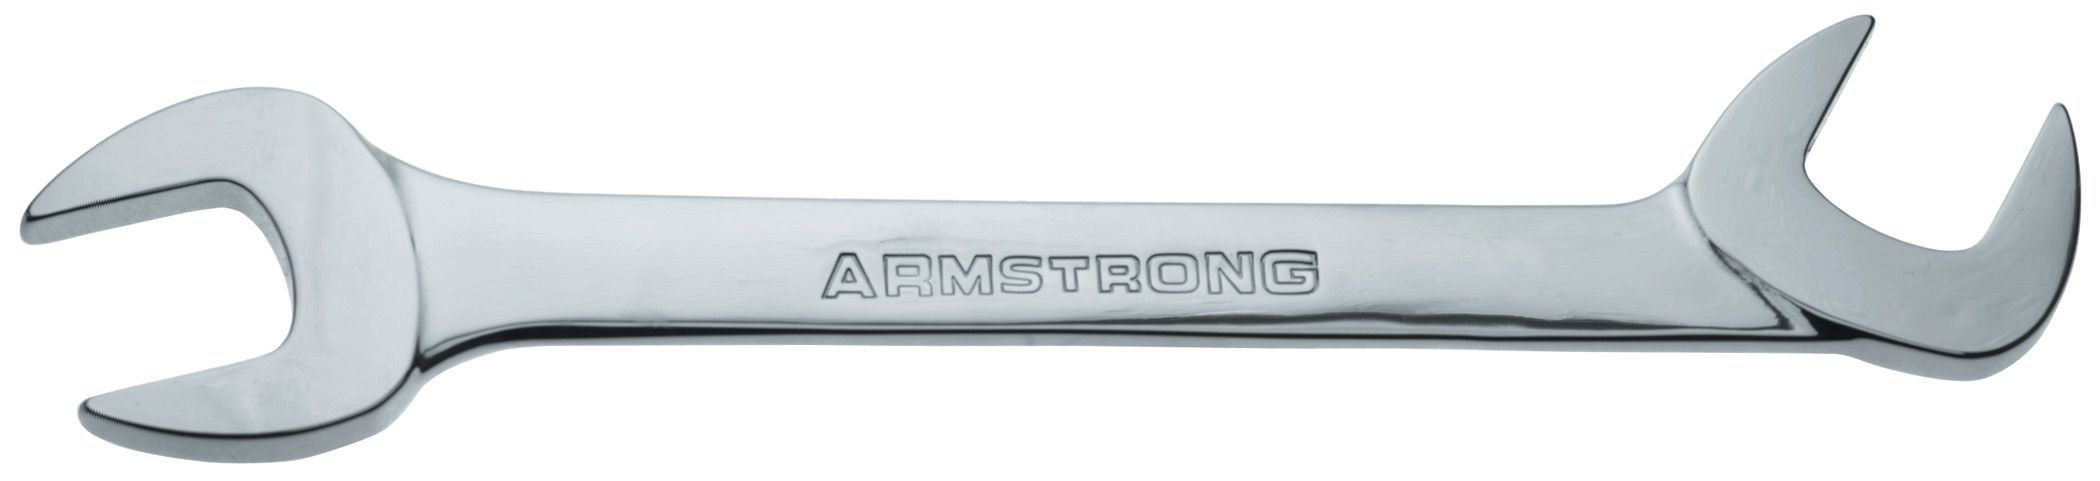 Armstrong 3/8 in. Full Polish 15&deg; and 60&deg; Open End Angle Wrench